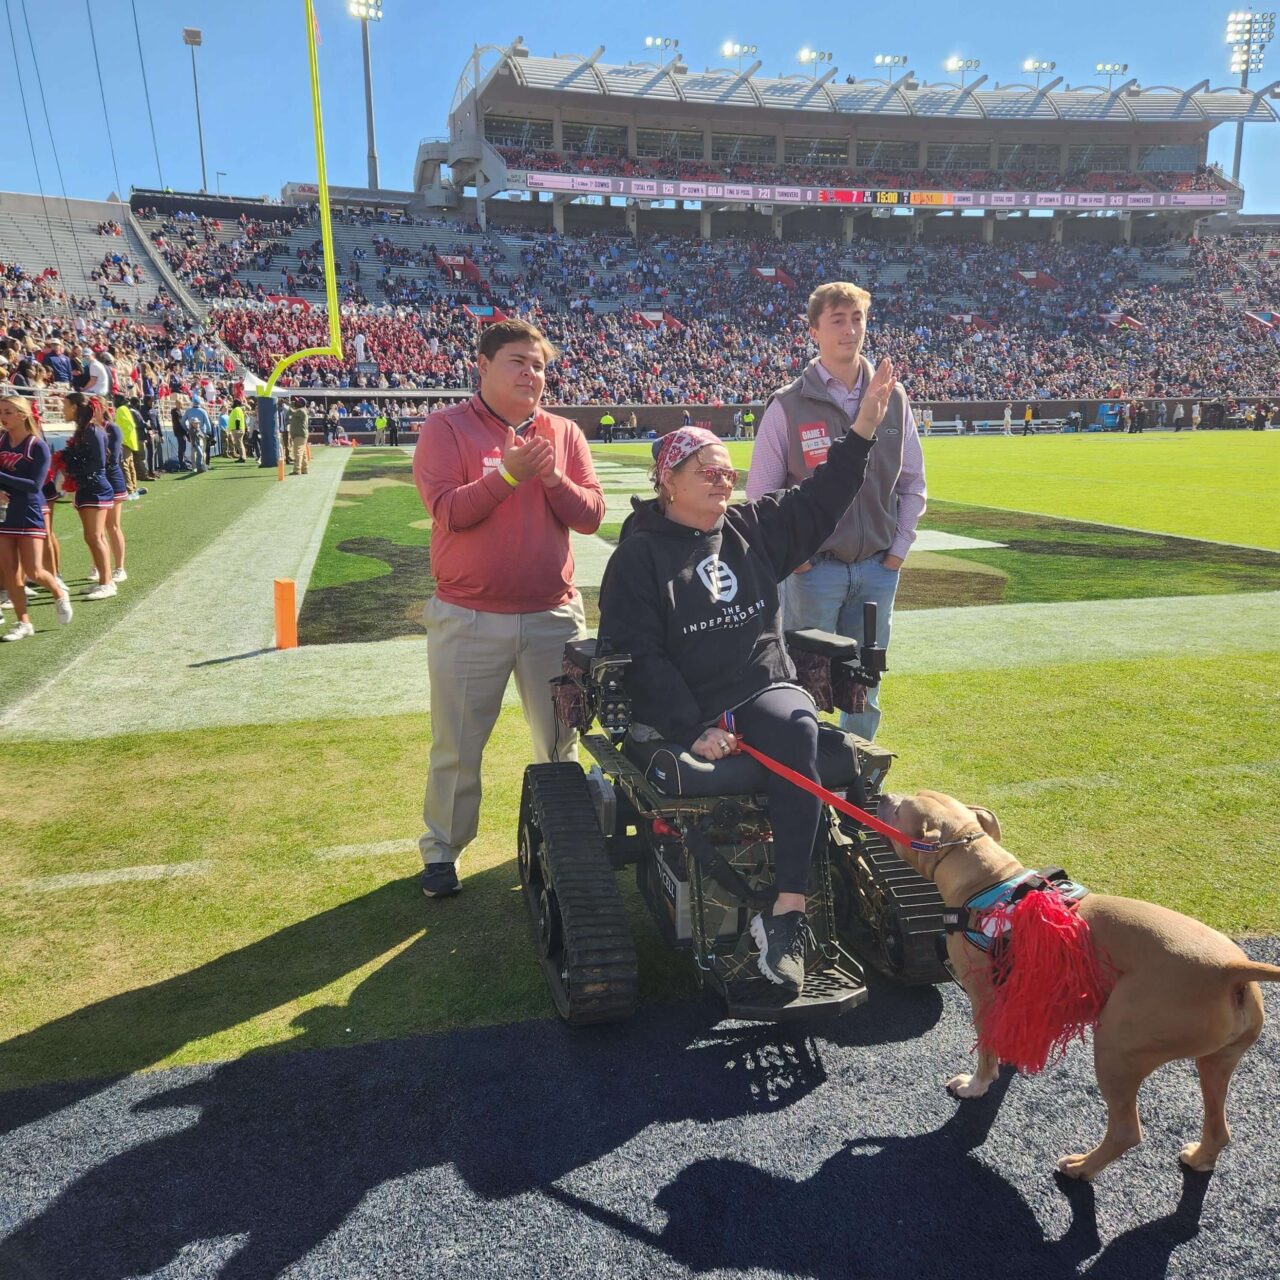 Brooks standing, Hutchinson in track chair, Marks, and dog pork chop on the football field